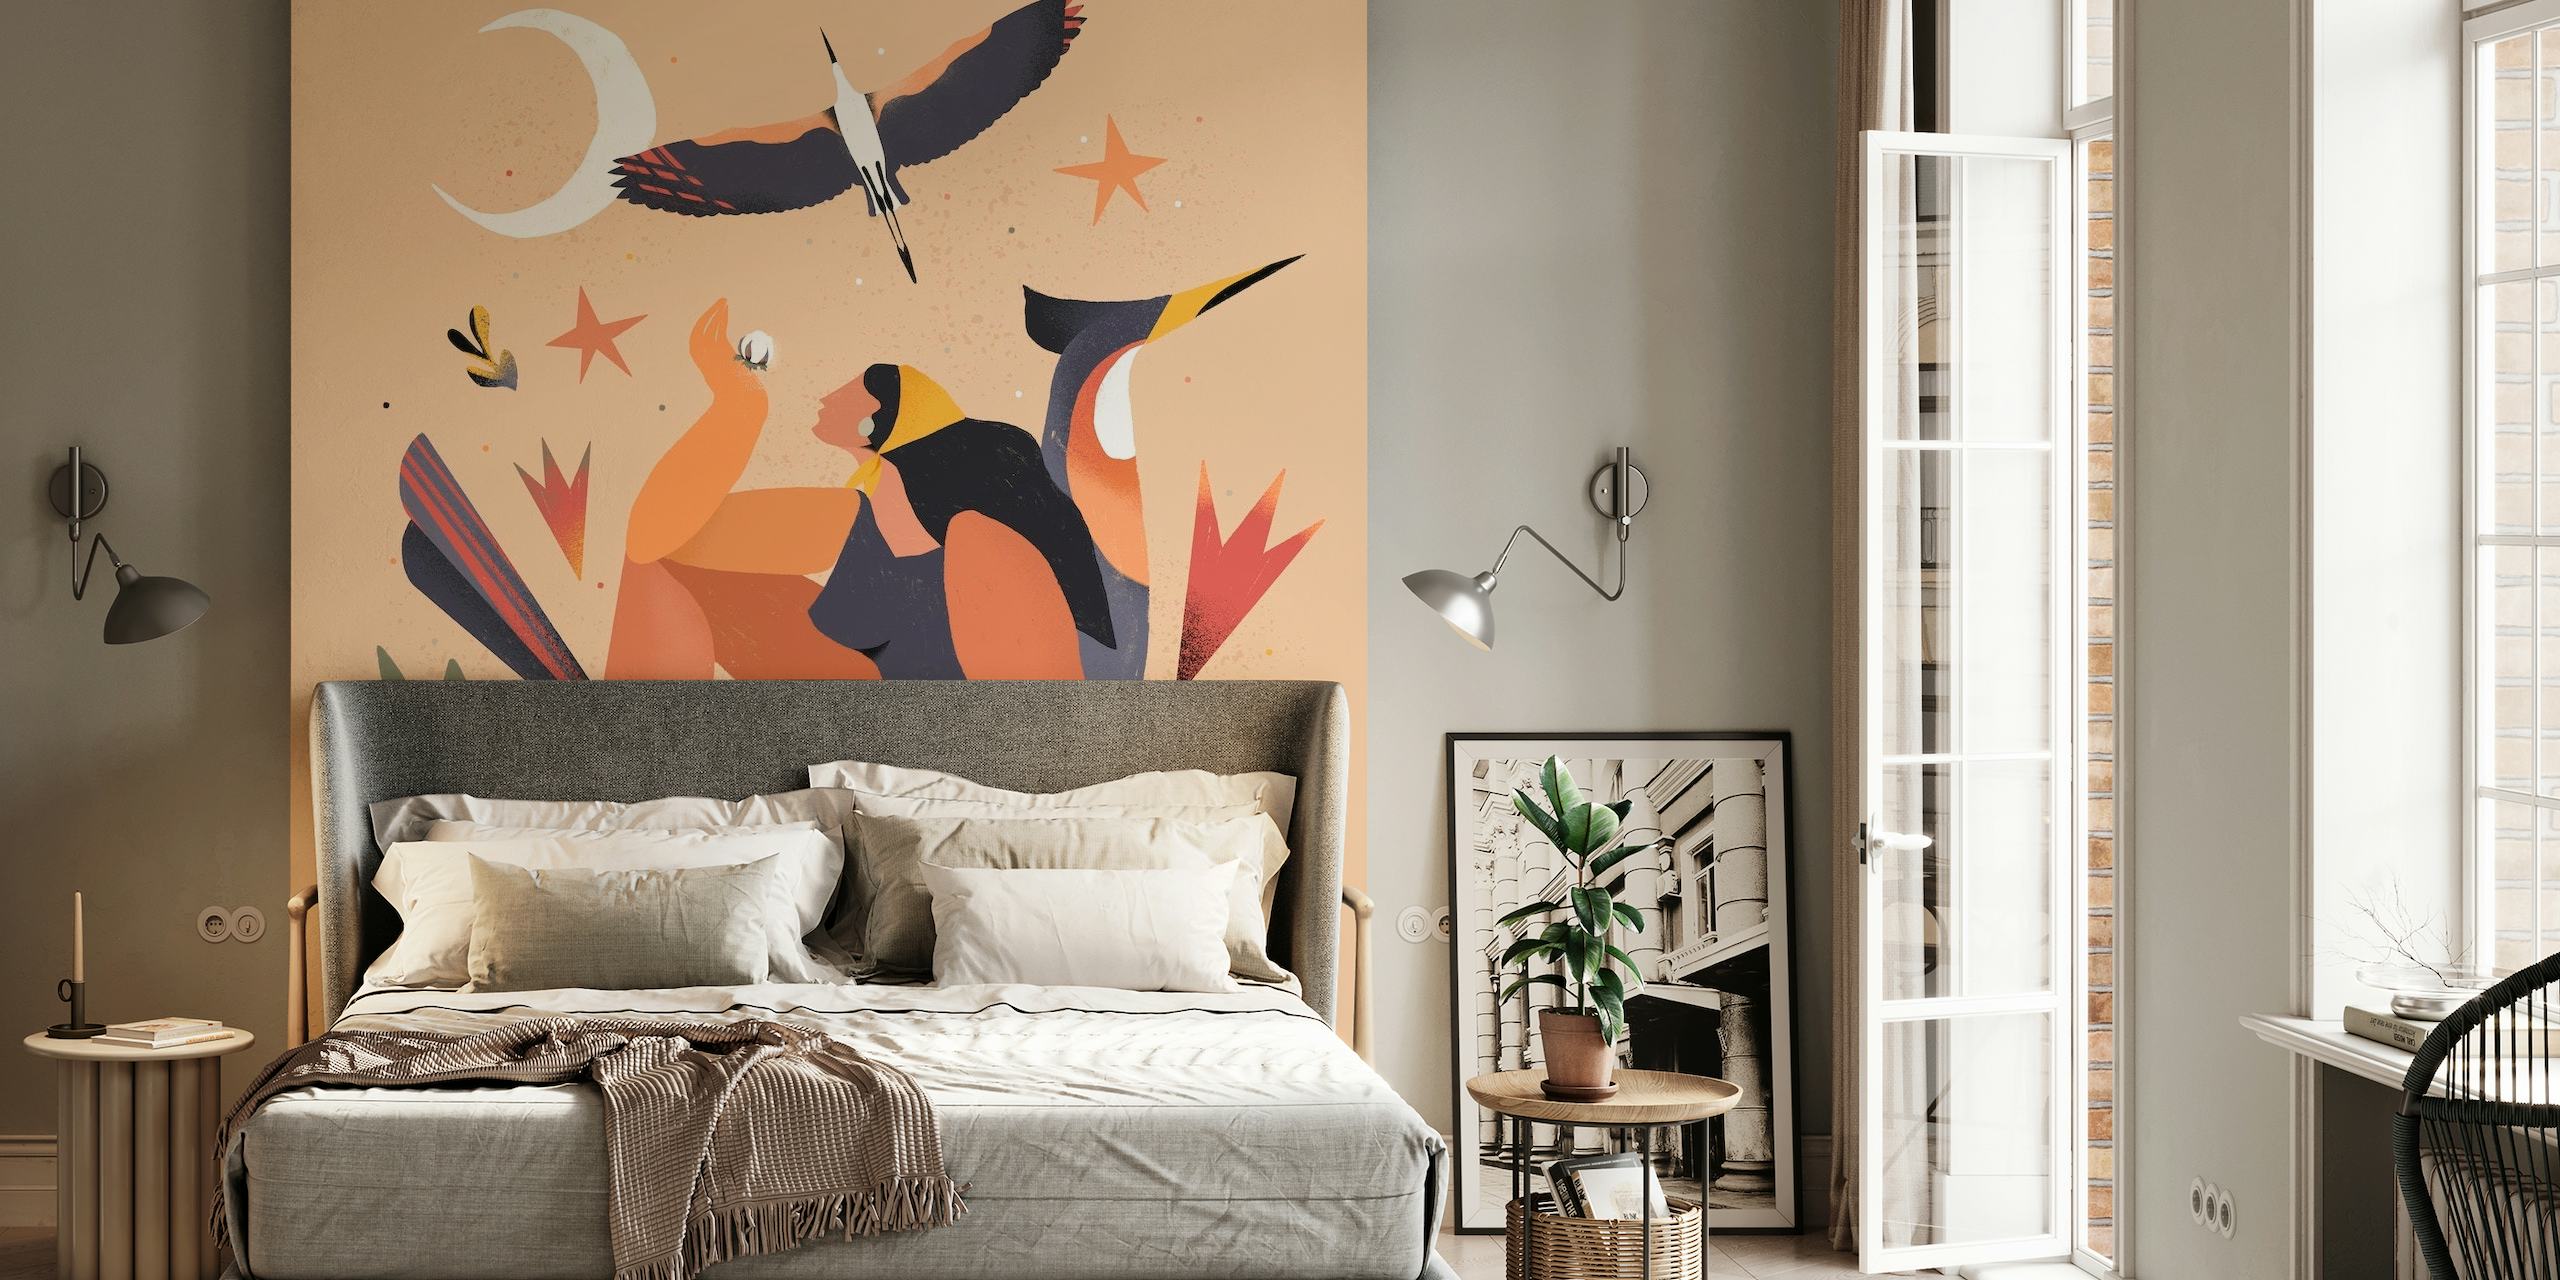 Abstract WoMan Nature wall mural with human silhouettes, flora, and fauna